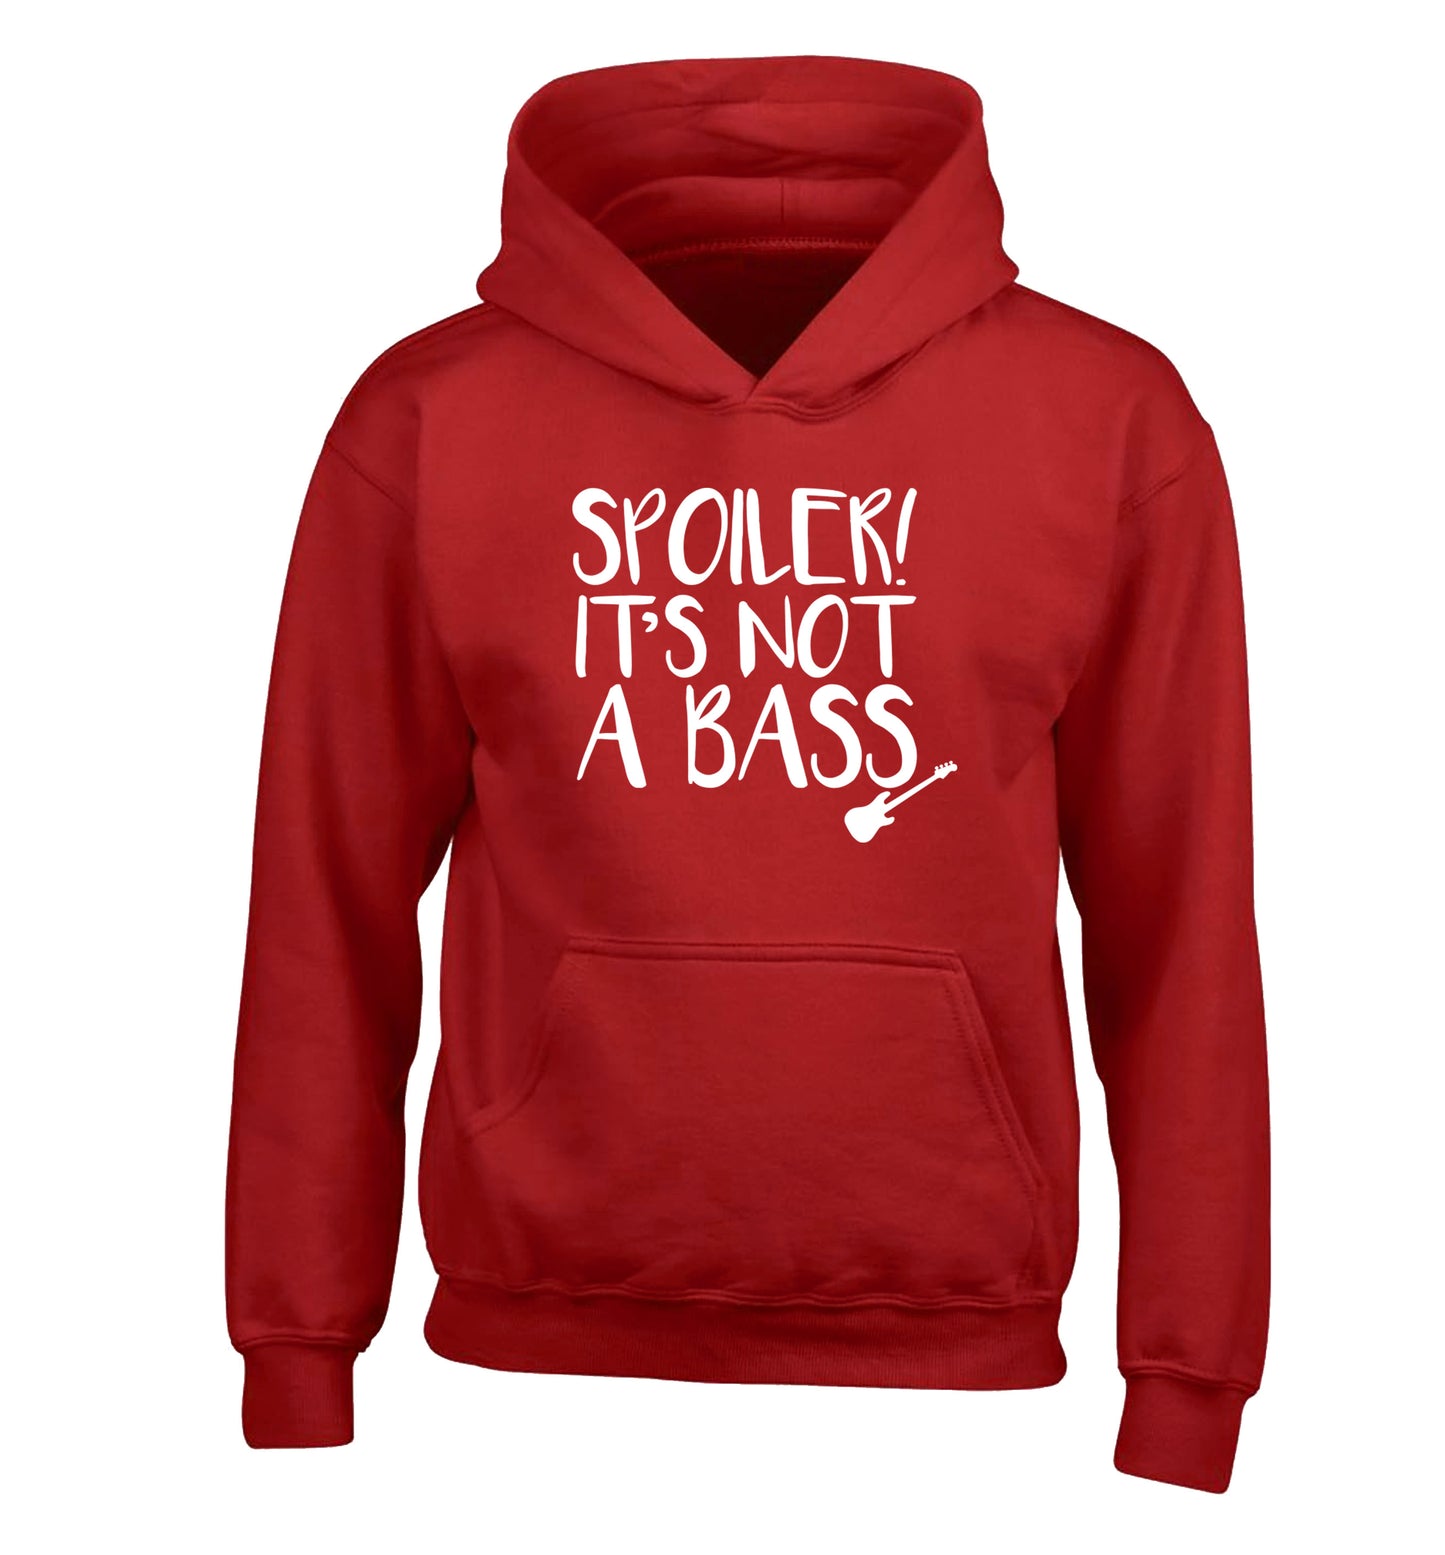 Spoiler it's not a bass children's red hoodie 12-13 Years